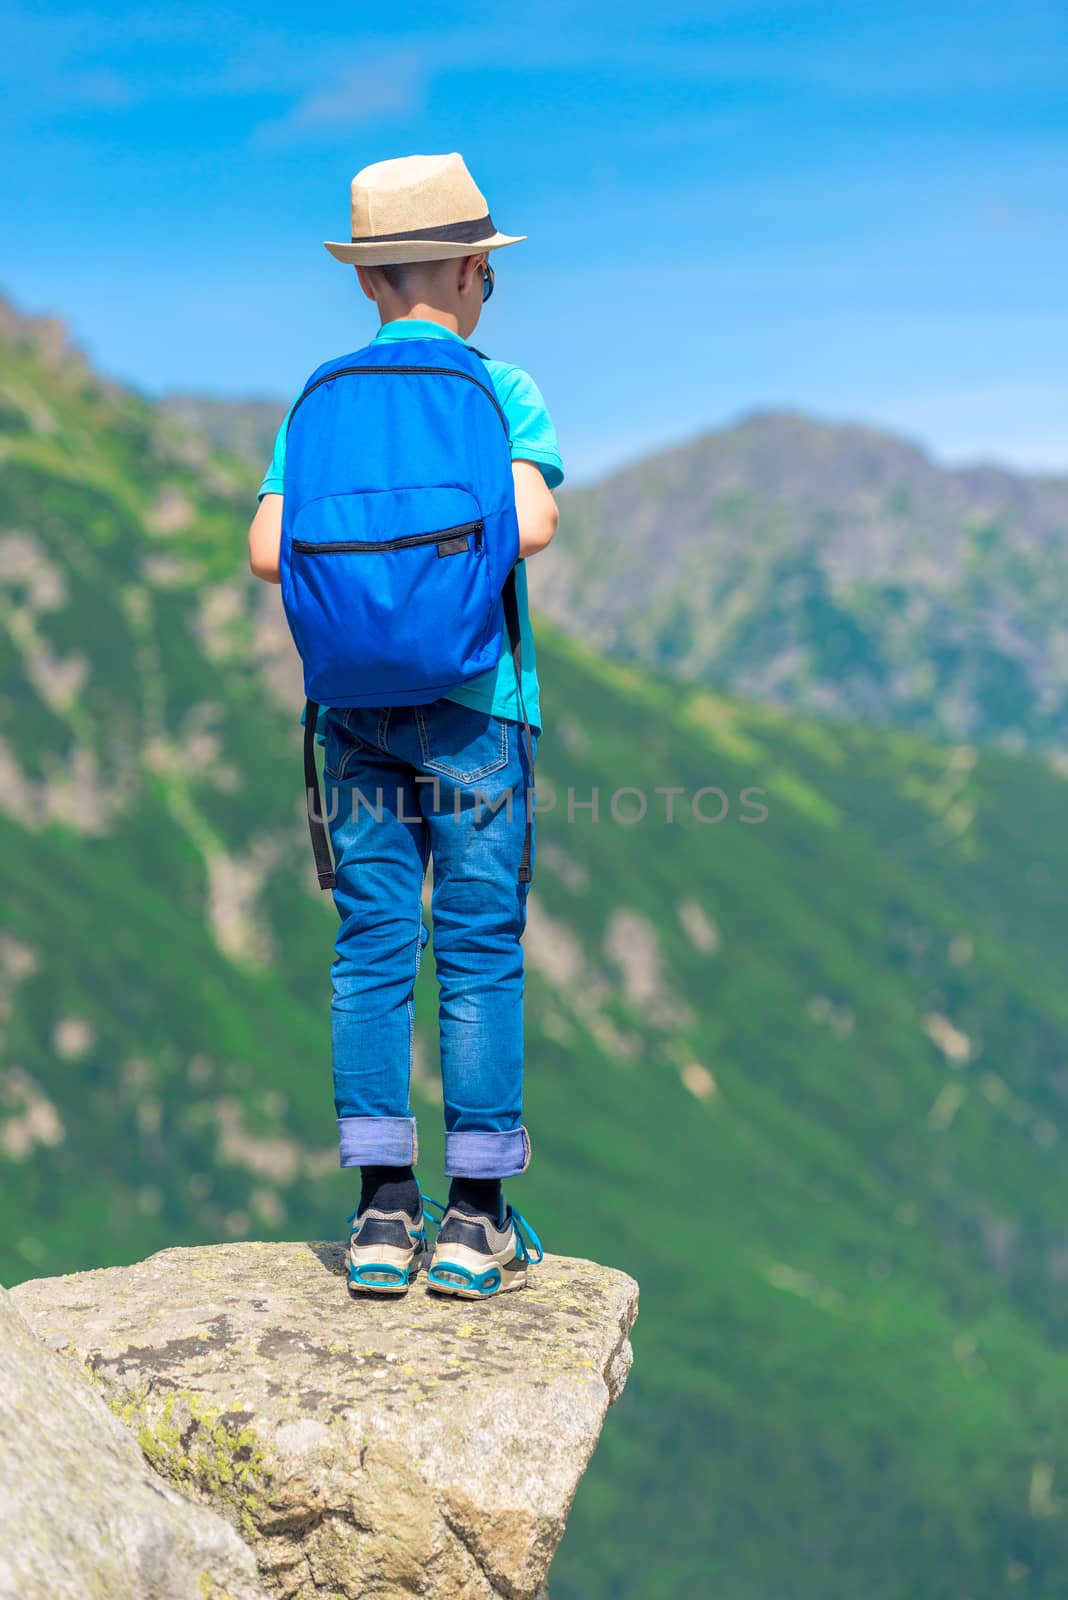 boy with a backpack in the mountains stands on a rock and looks by kosmsos111